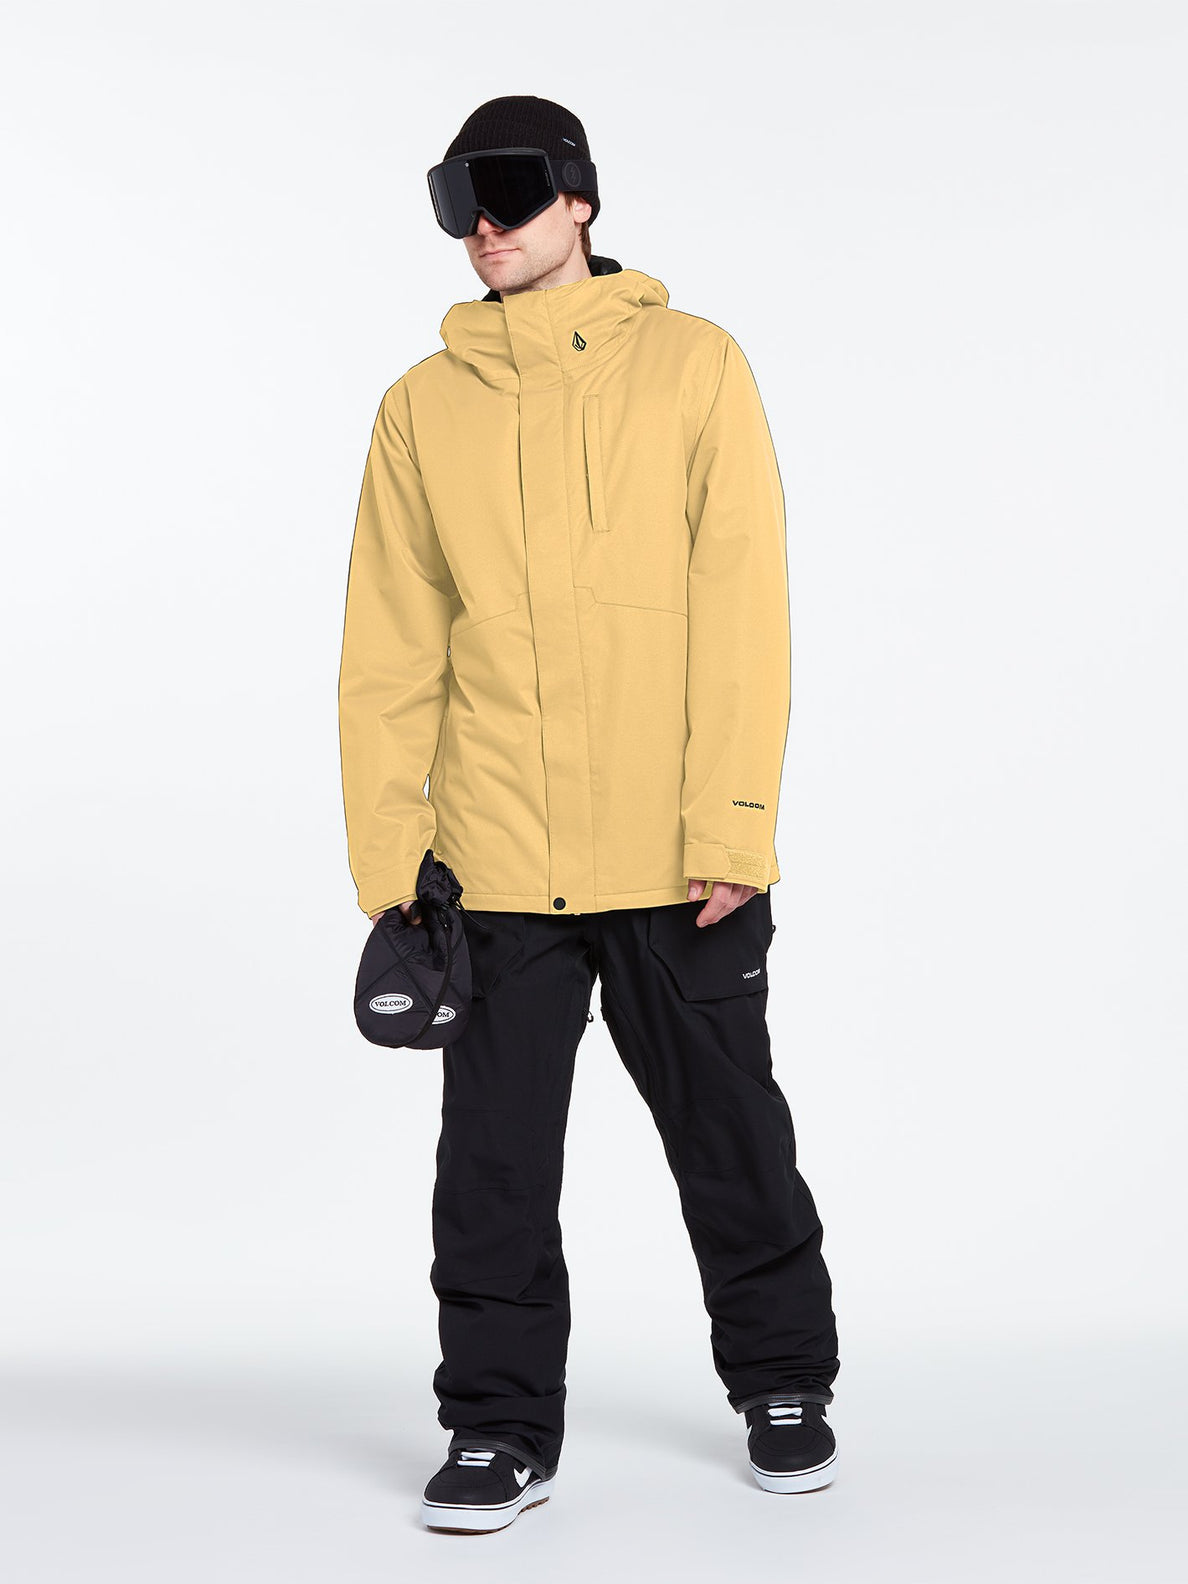 17Forty Insulated Jacket - GOLD (G0452114_GLD) [4]